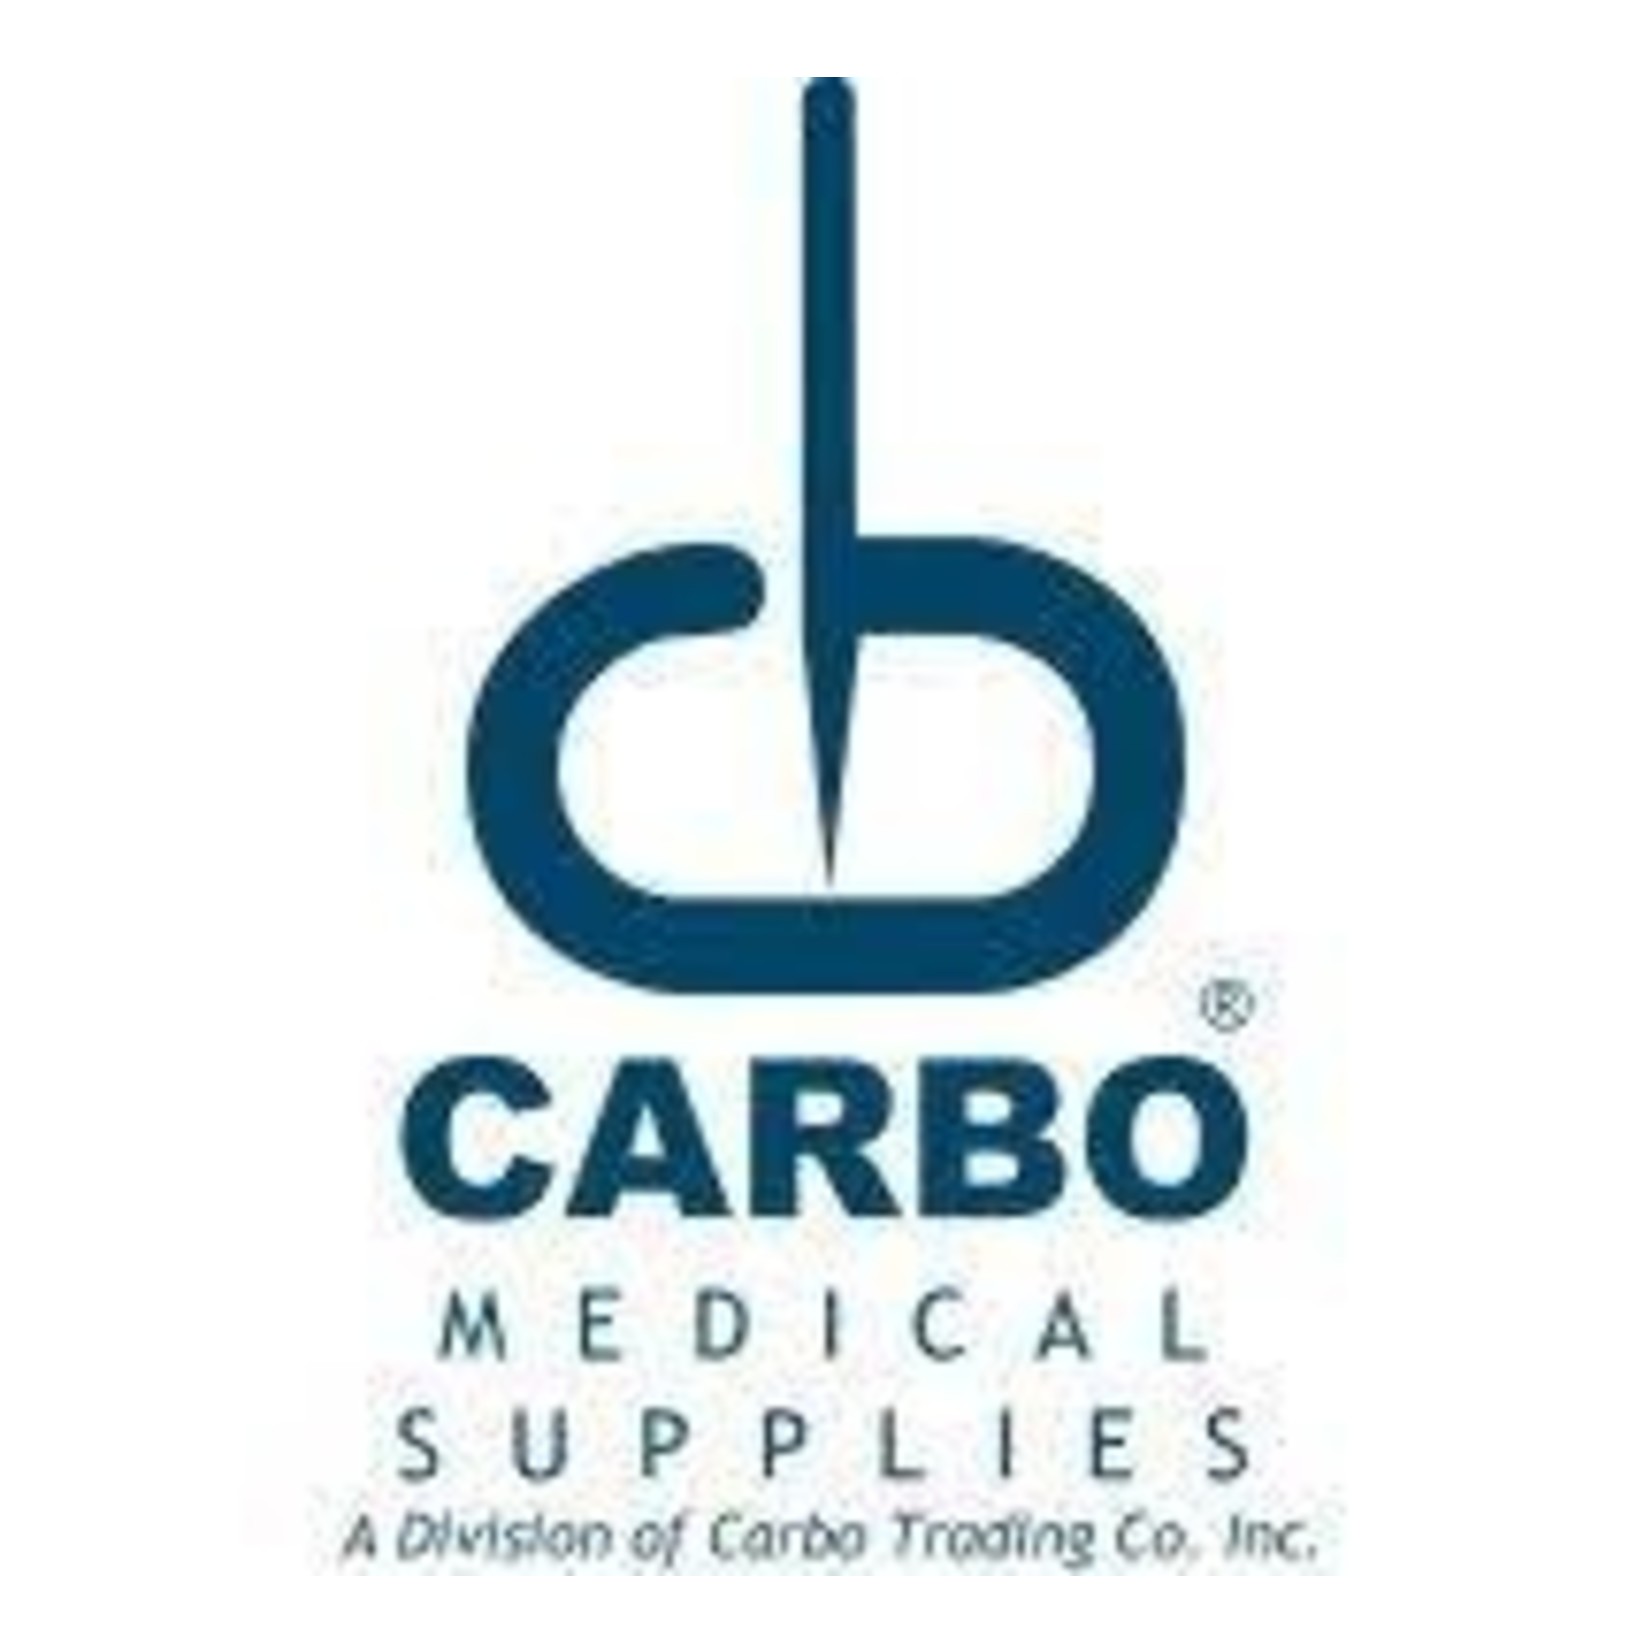 CARBO CARBO ACUPUNCTURE NEEDLE .25 x 25mm 100 PACK